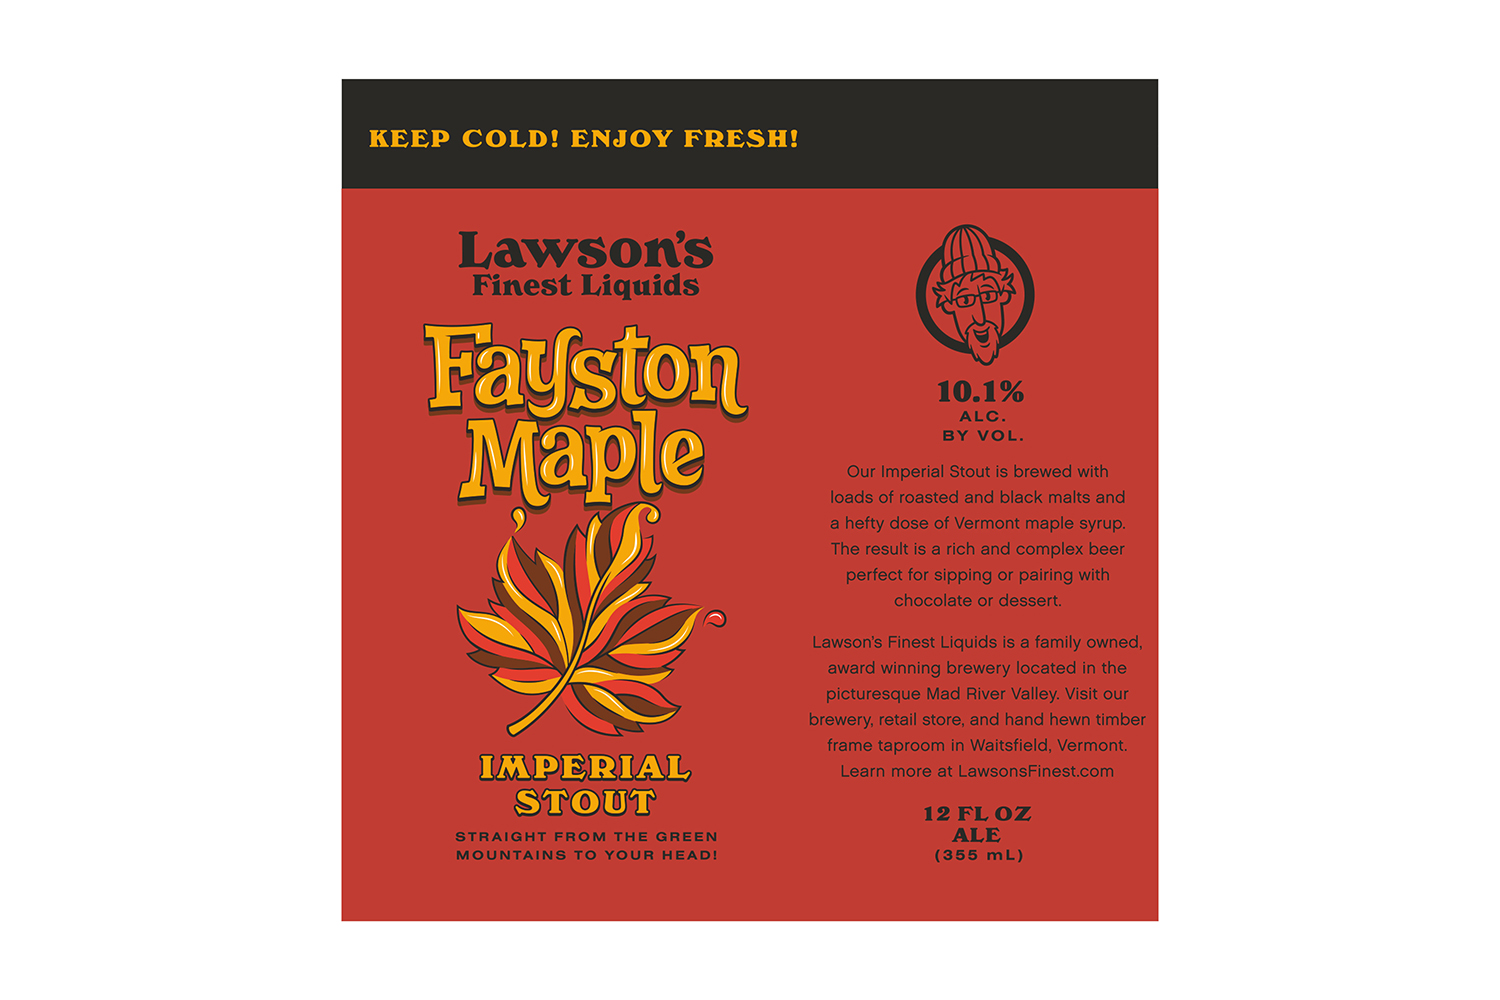 Fayston Maple Imperial Stout Lawsons Finest Liquids